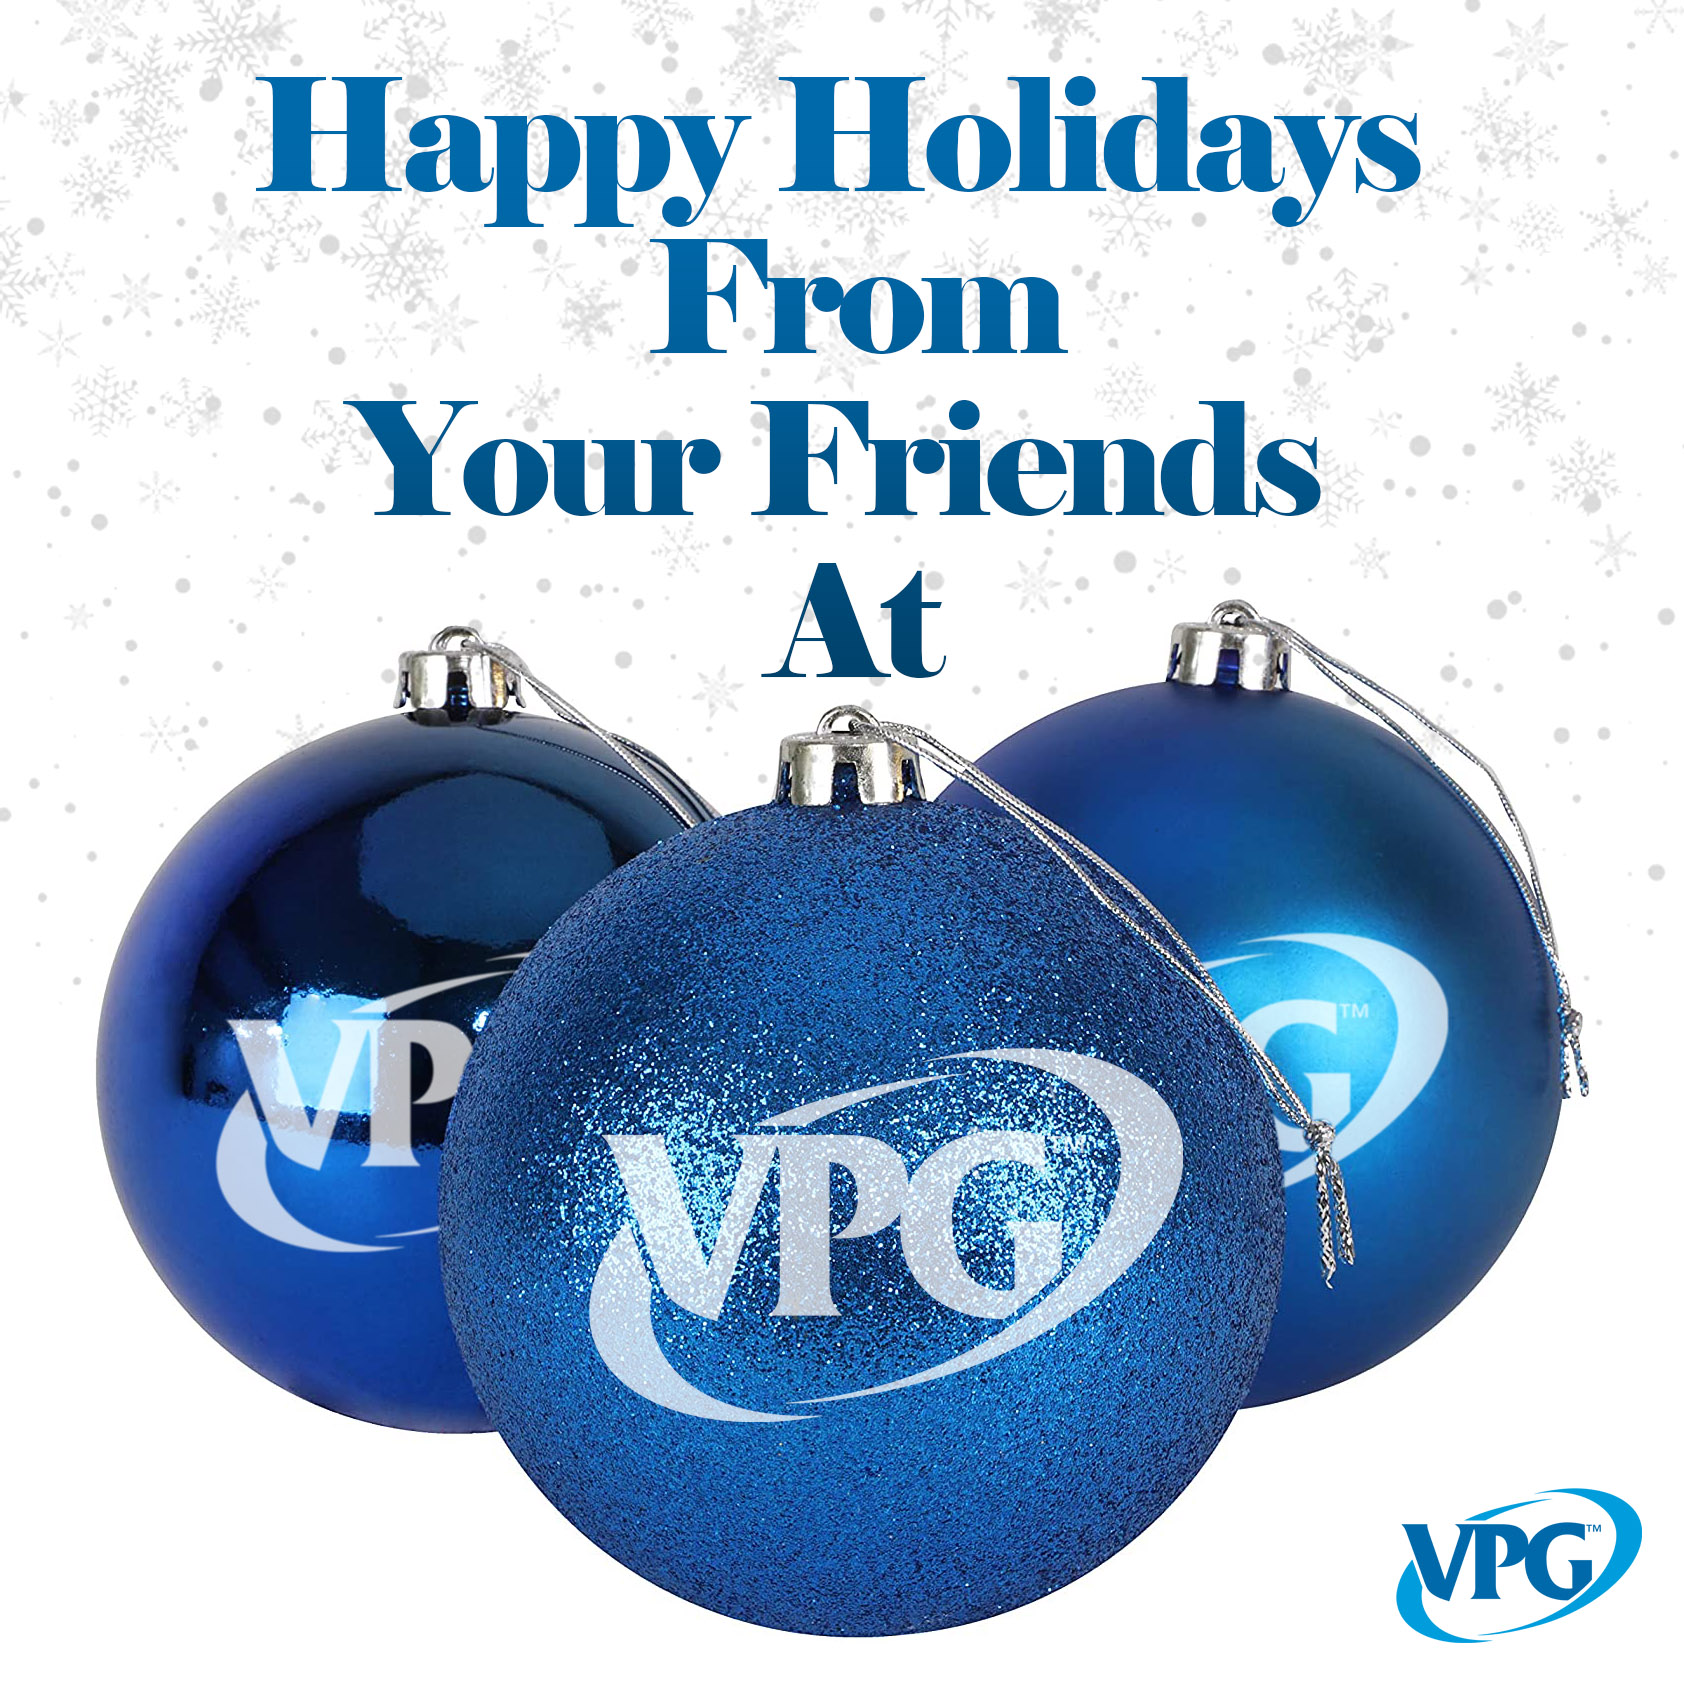 Happy Holidays from Vanguard Protex Global